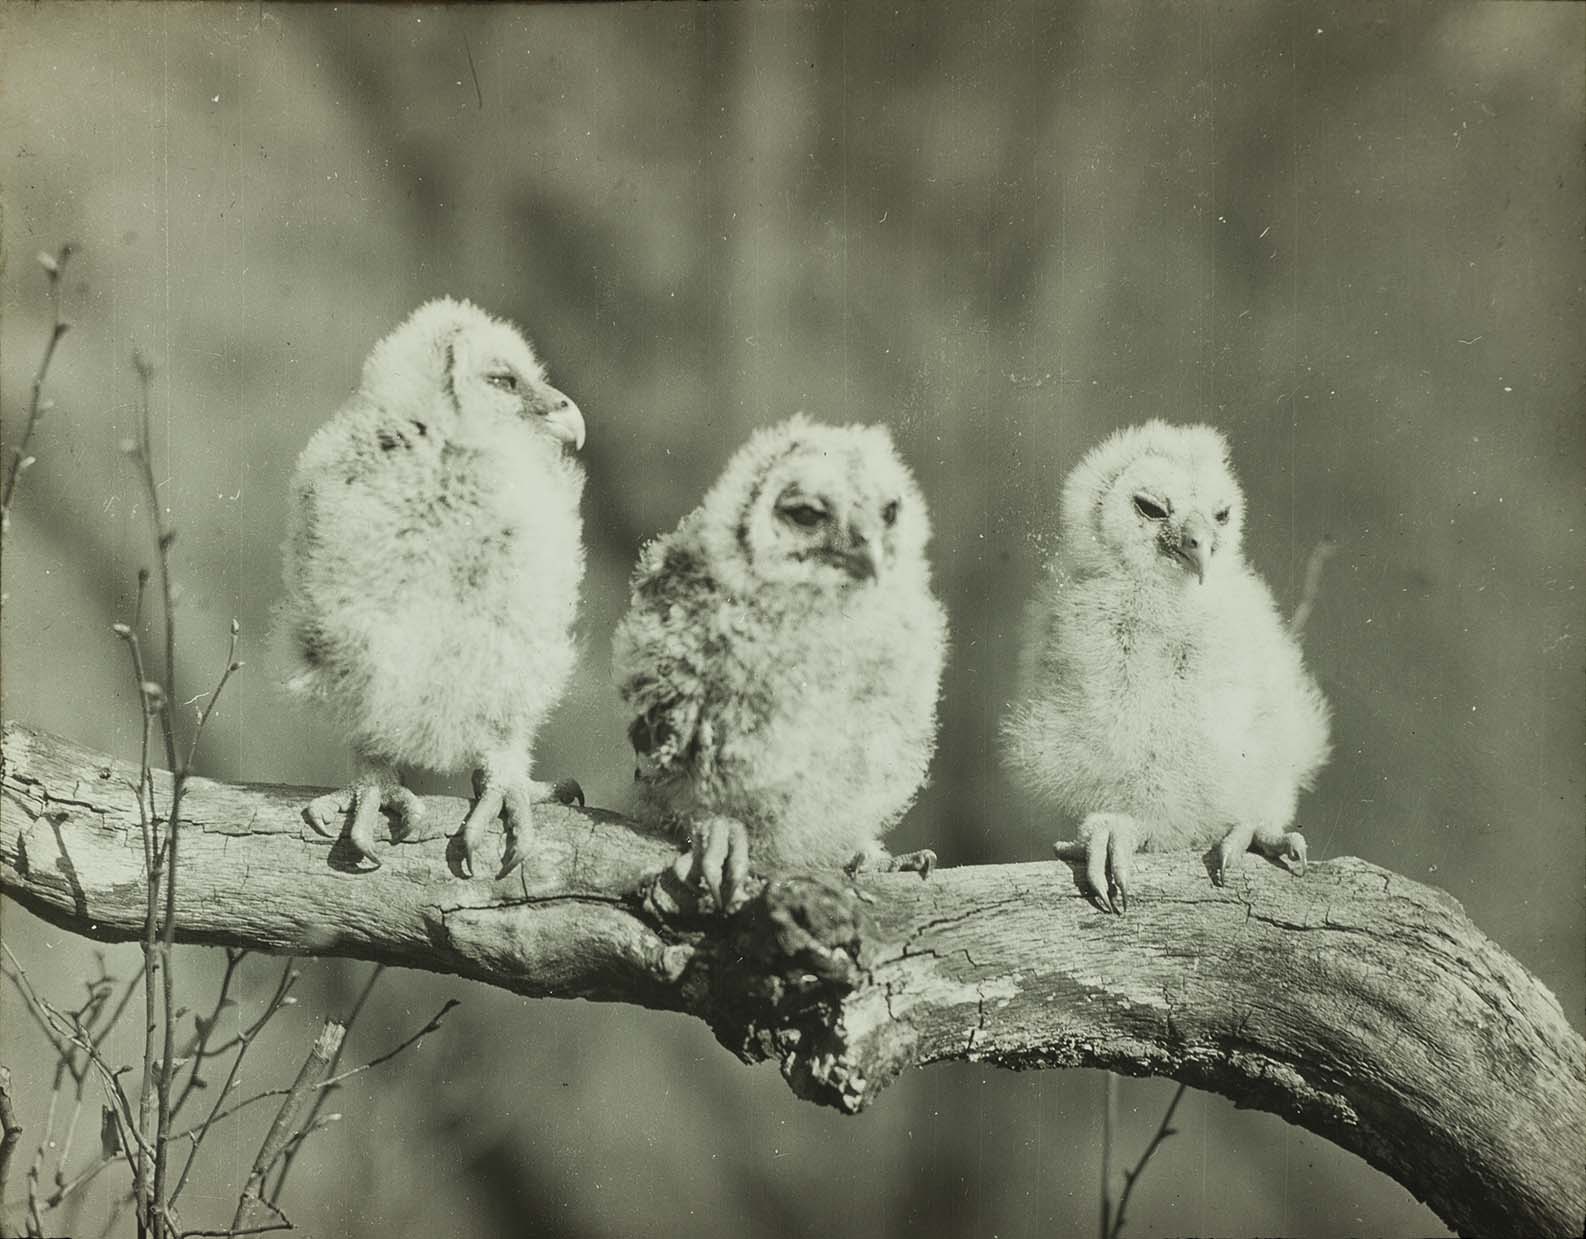 Lantern slide and photograph of three young Barred Owls perching on a tree branch